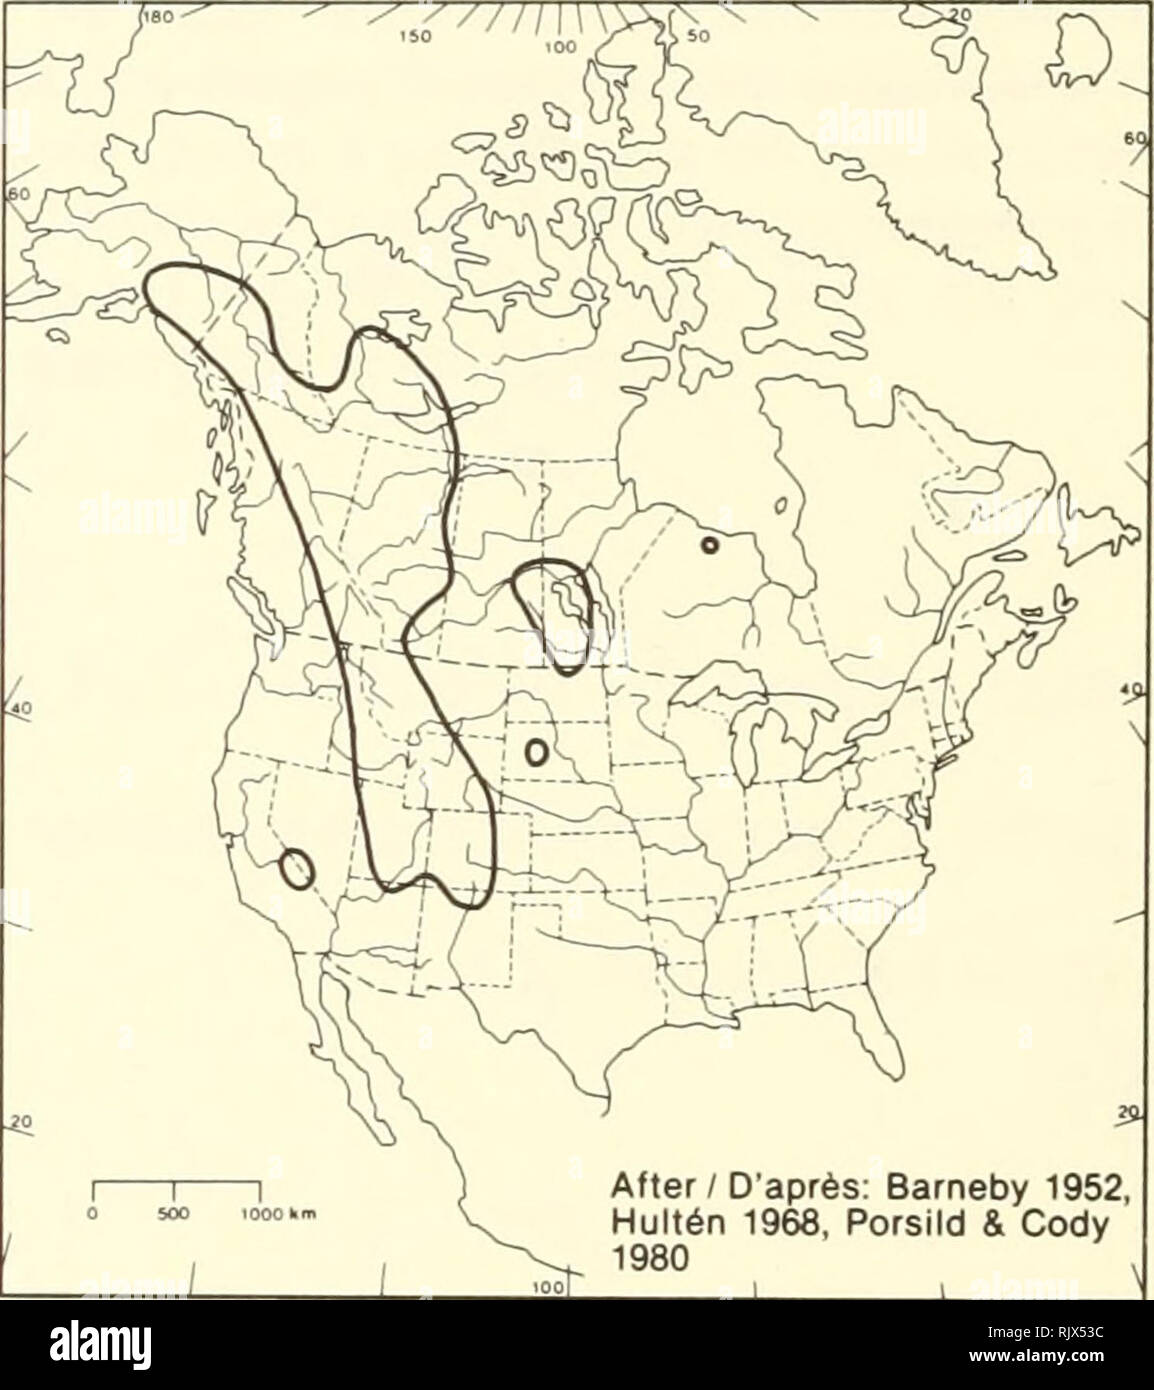 . Atlas of the rare vascular plants of Ontario. Rare plants; Botany. After / D'après: Barneby 1952, Hultén 1968, Porsild &amp; Cody 1980 HABITAT: Littoral areas. STATUS: Rare in the continental Northwest Territories. NOTES: Plants tound at the junction of the Fawn and Otter rivers are morphologically transitional between var. sericea and var. foliolosa and they have been mapped as var. foliolosa. HABITAT: Régions littorales. SITUATION: Rare dans la partie continentale des Terri- toires du Nord-Ouest. REMARQUES: Les plantes présentes au confluent des rivières Fawn et Otter ont une morphologie i Stock Photo